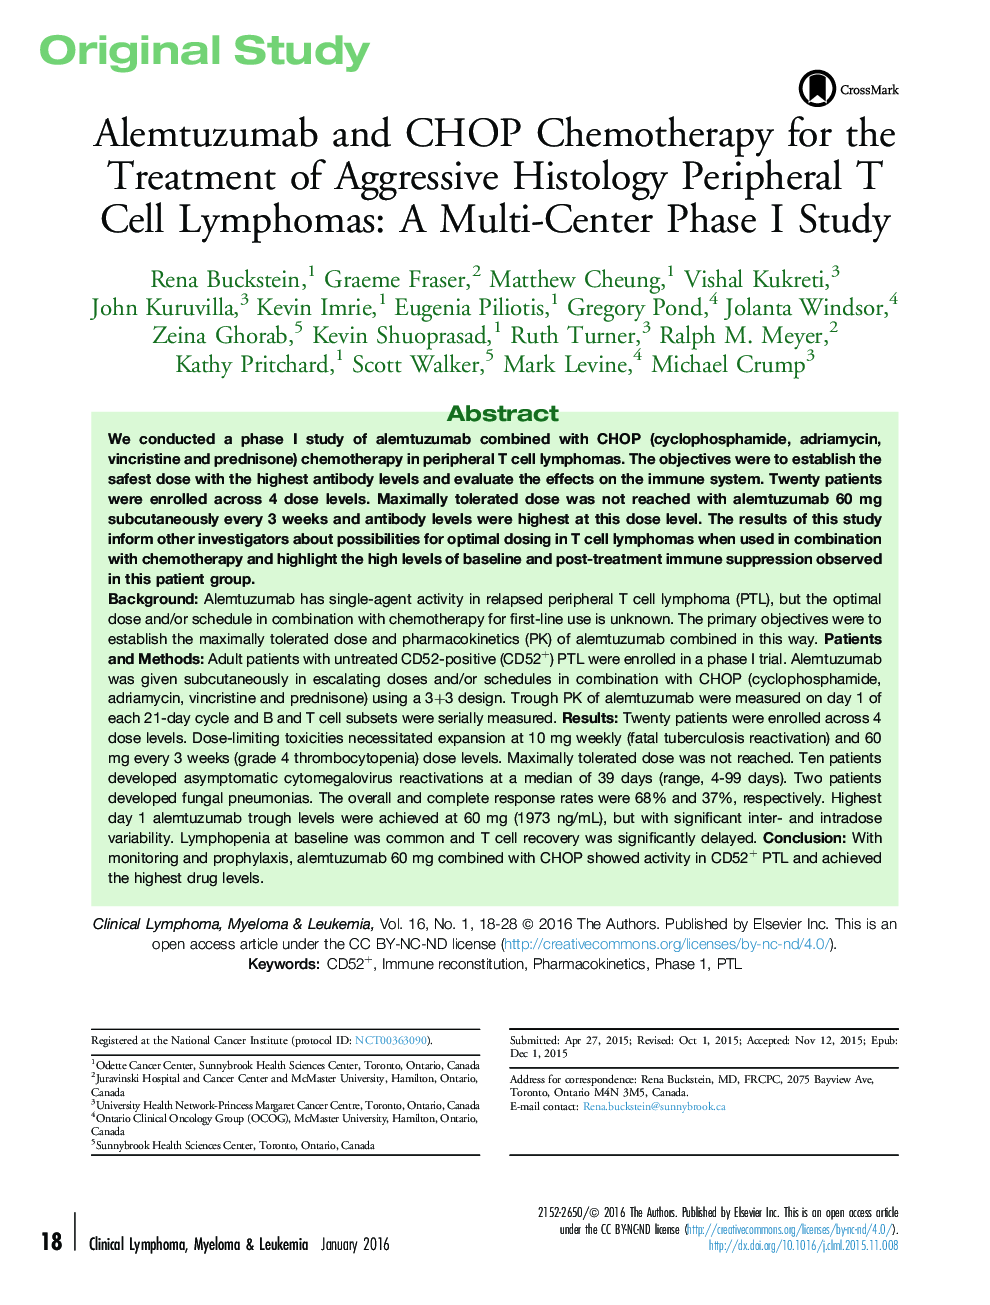 Alemtuzumab and CHOP Chemotherapy for the Treatment of Aggressive Histology Peripheral T Cell Lymphomas: A Multi-Center Phase I Study